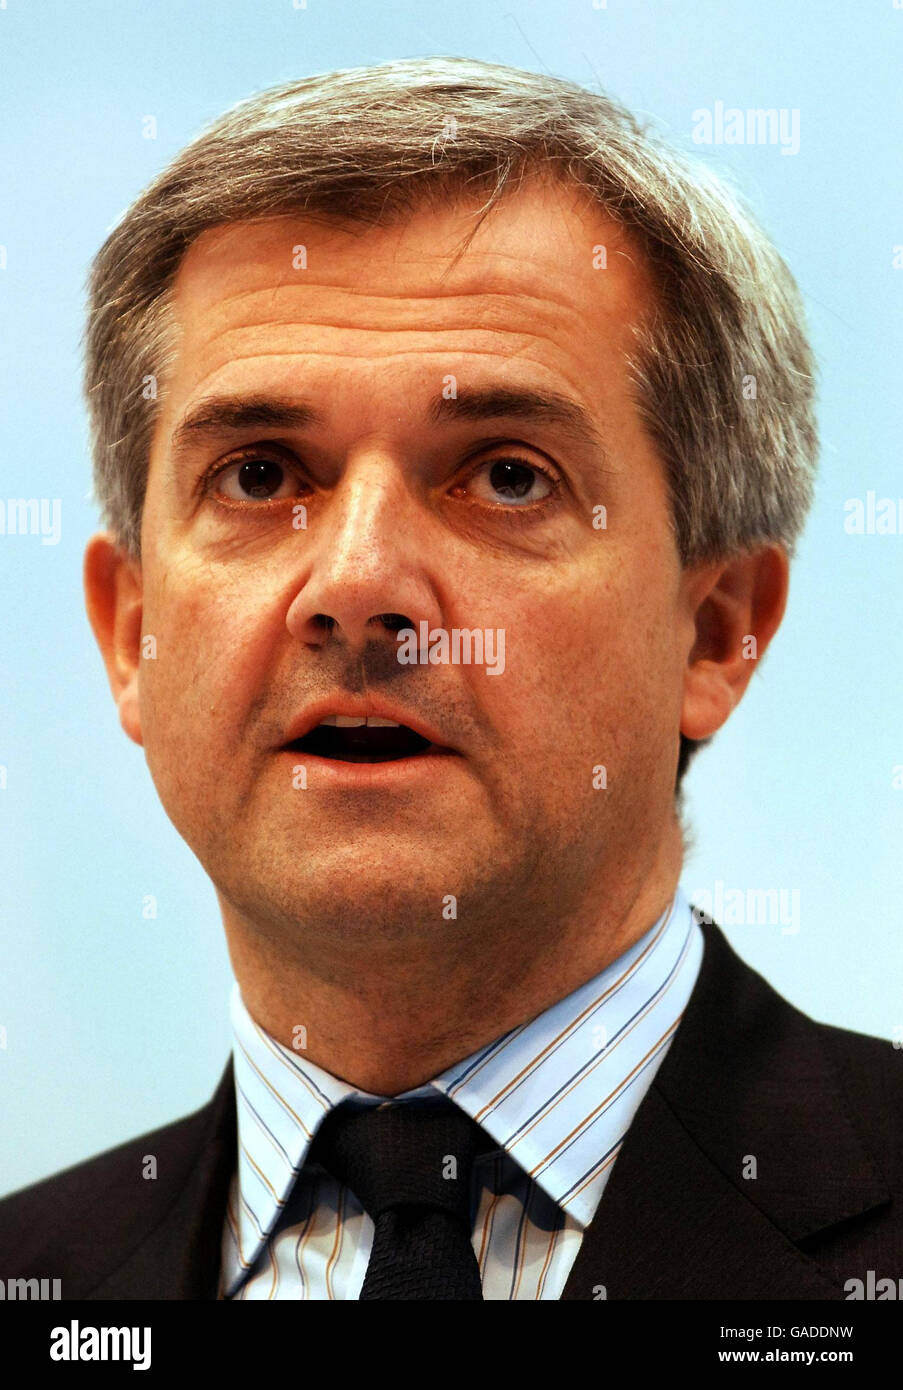 Chris Huhne MP one of the prospective Leaders of the Liberal Democratic Party, during his speech to the CBI (Confederation of British Industry), at the design centre in North London, this morning. Stock Photo